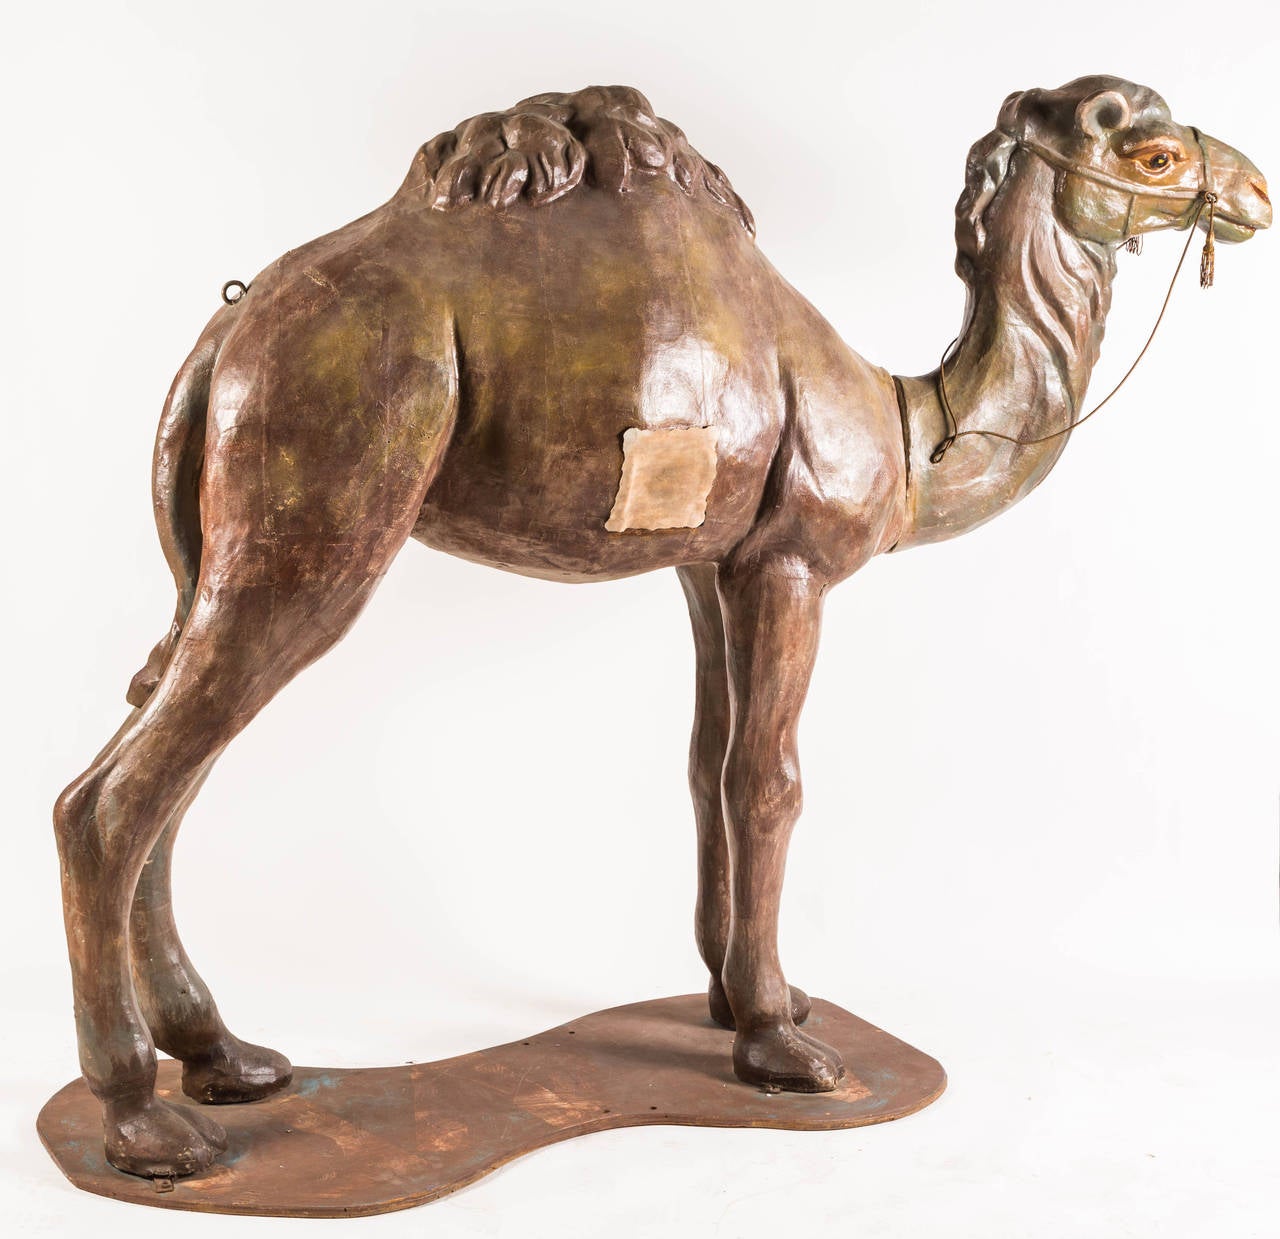 Lifesize of a baby camel from Luke Saunders Carnival show in Michigan, circa 1930s. Made of paper mâché. Sturdy and strong.